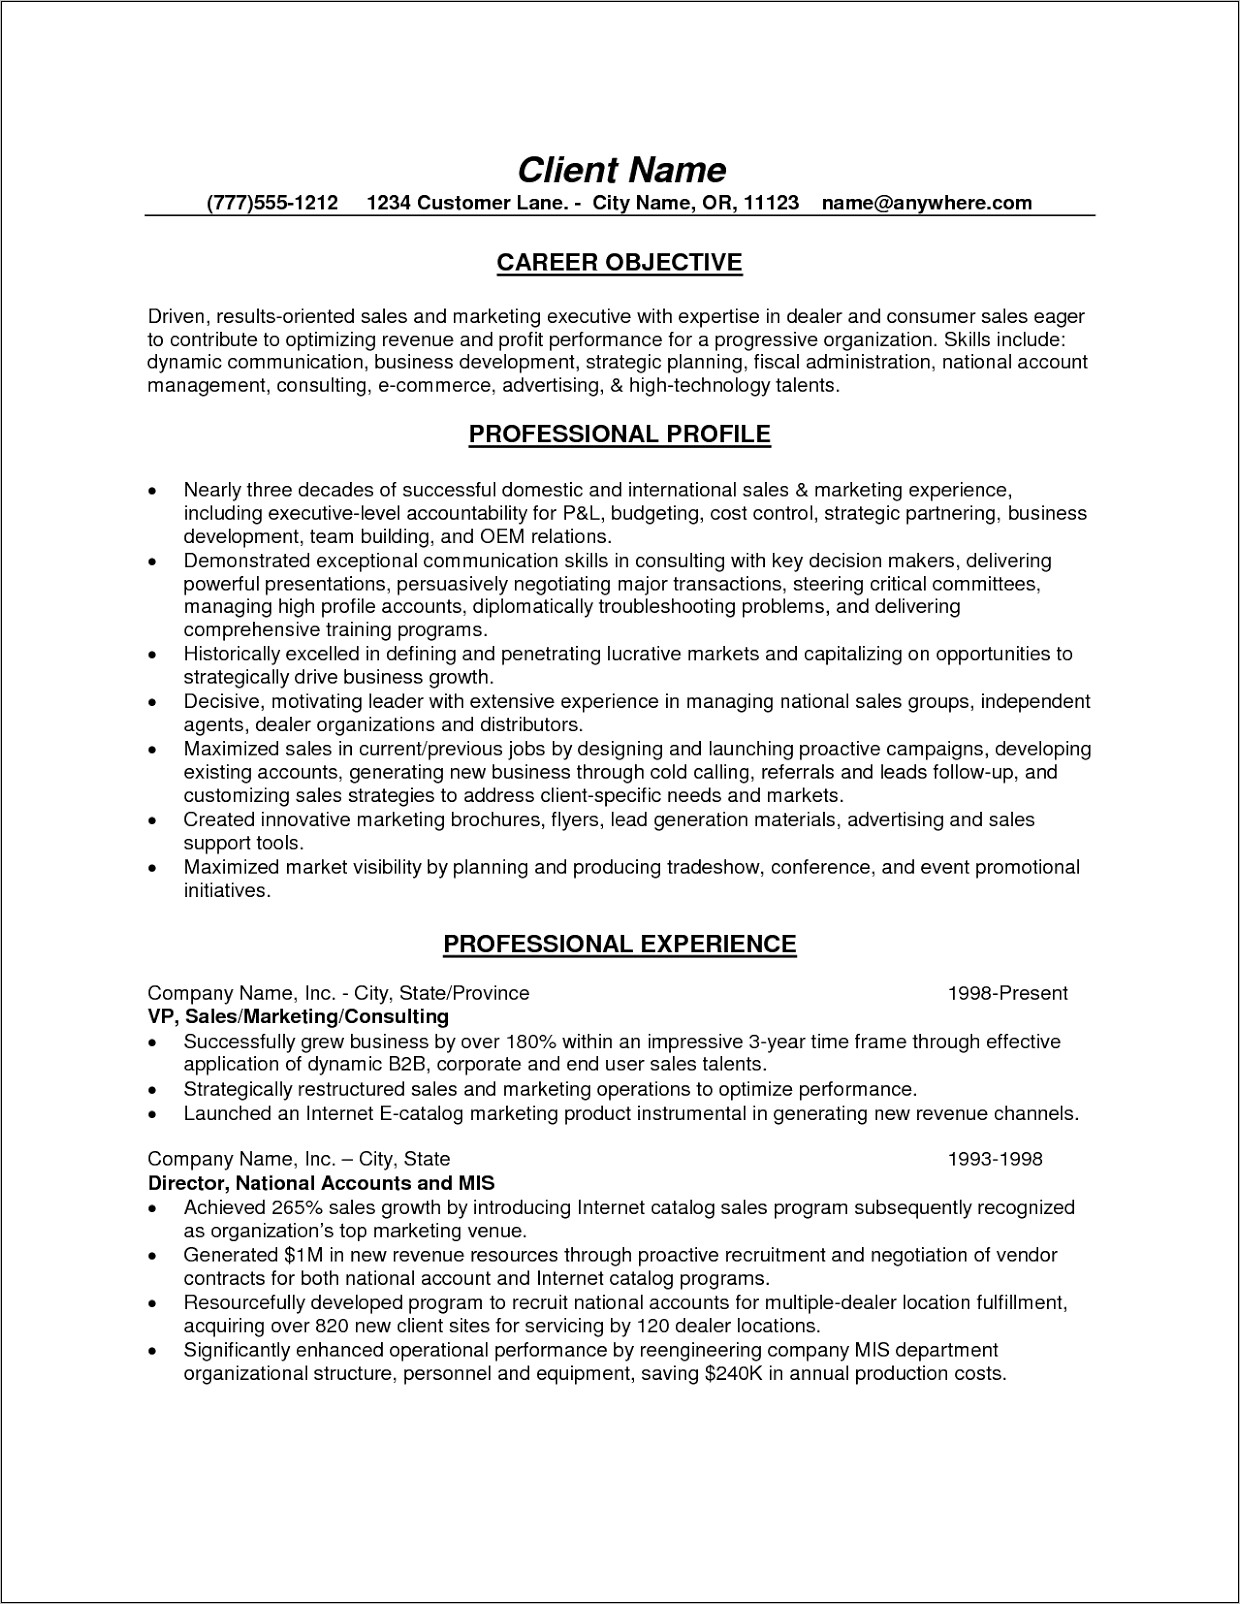 Engineering Resume Objective Statement Examples